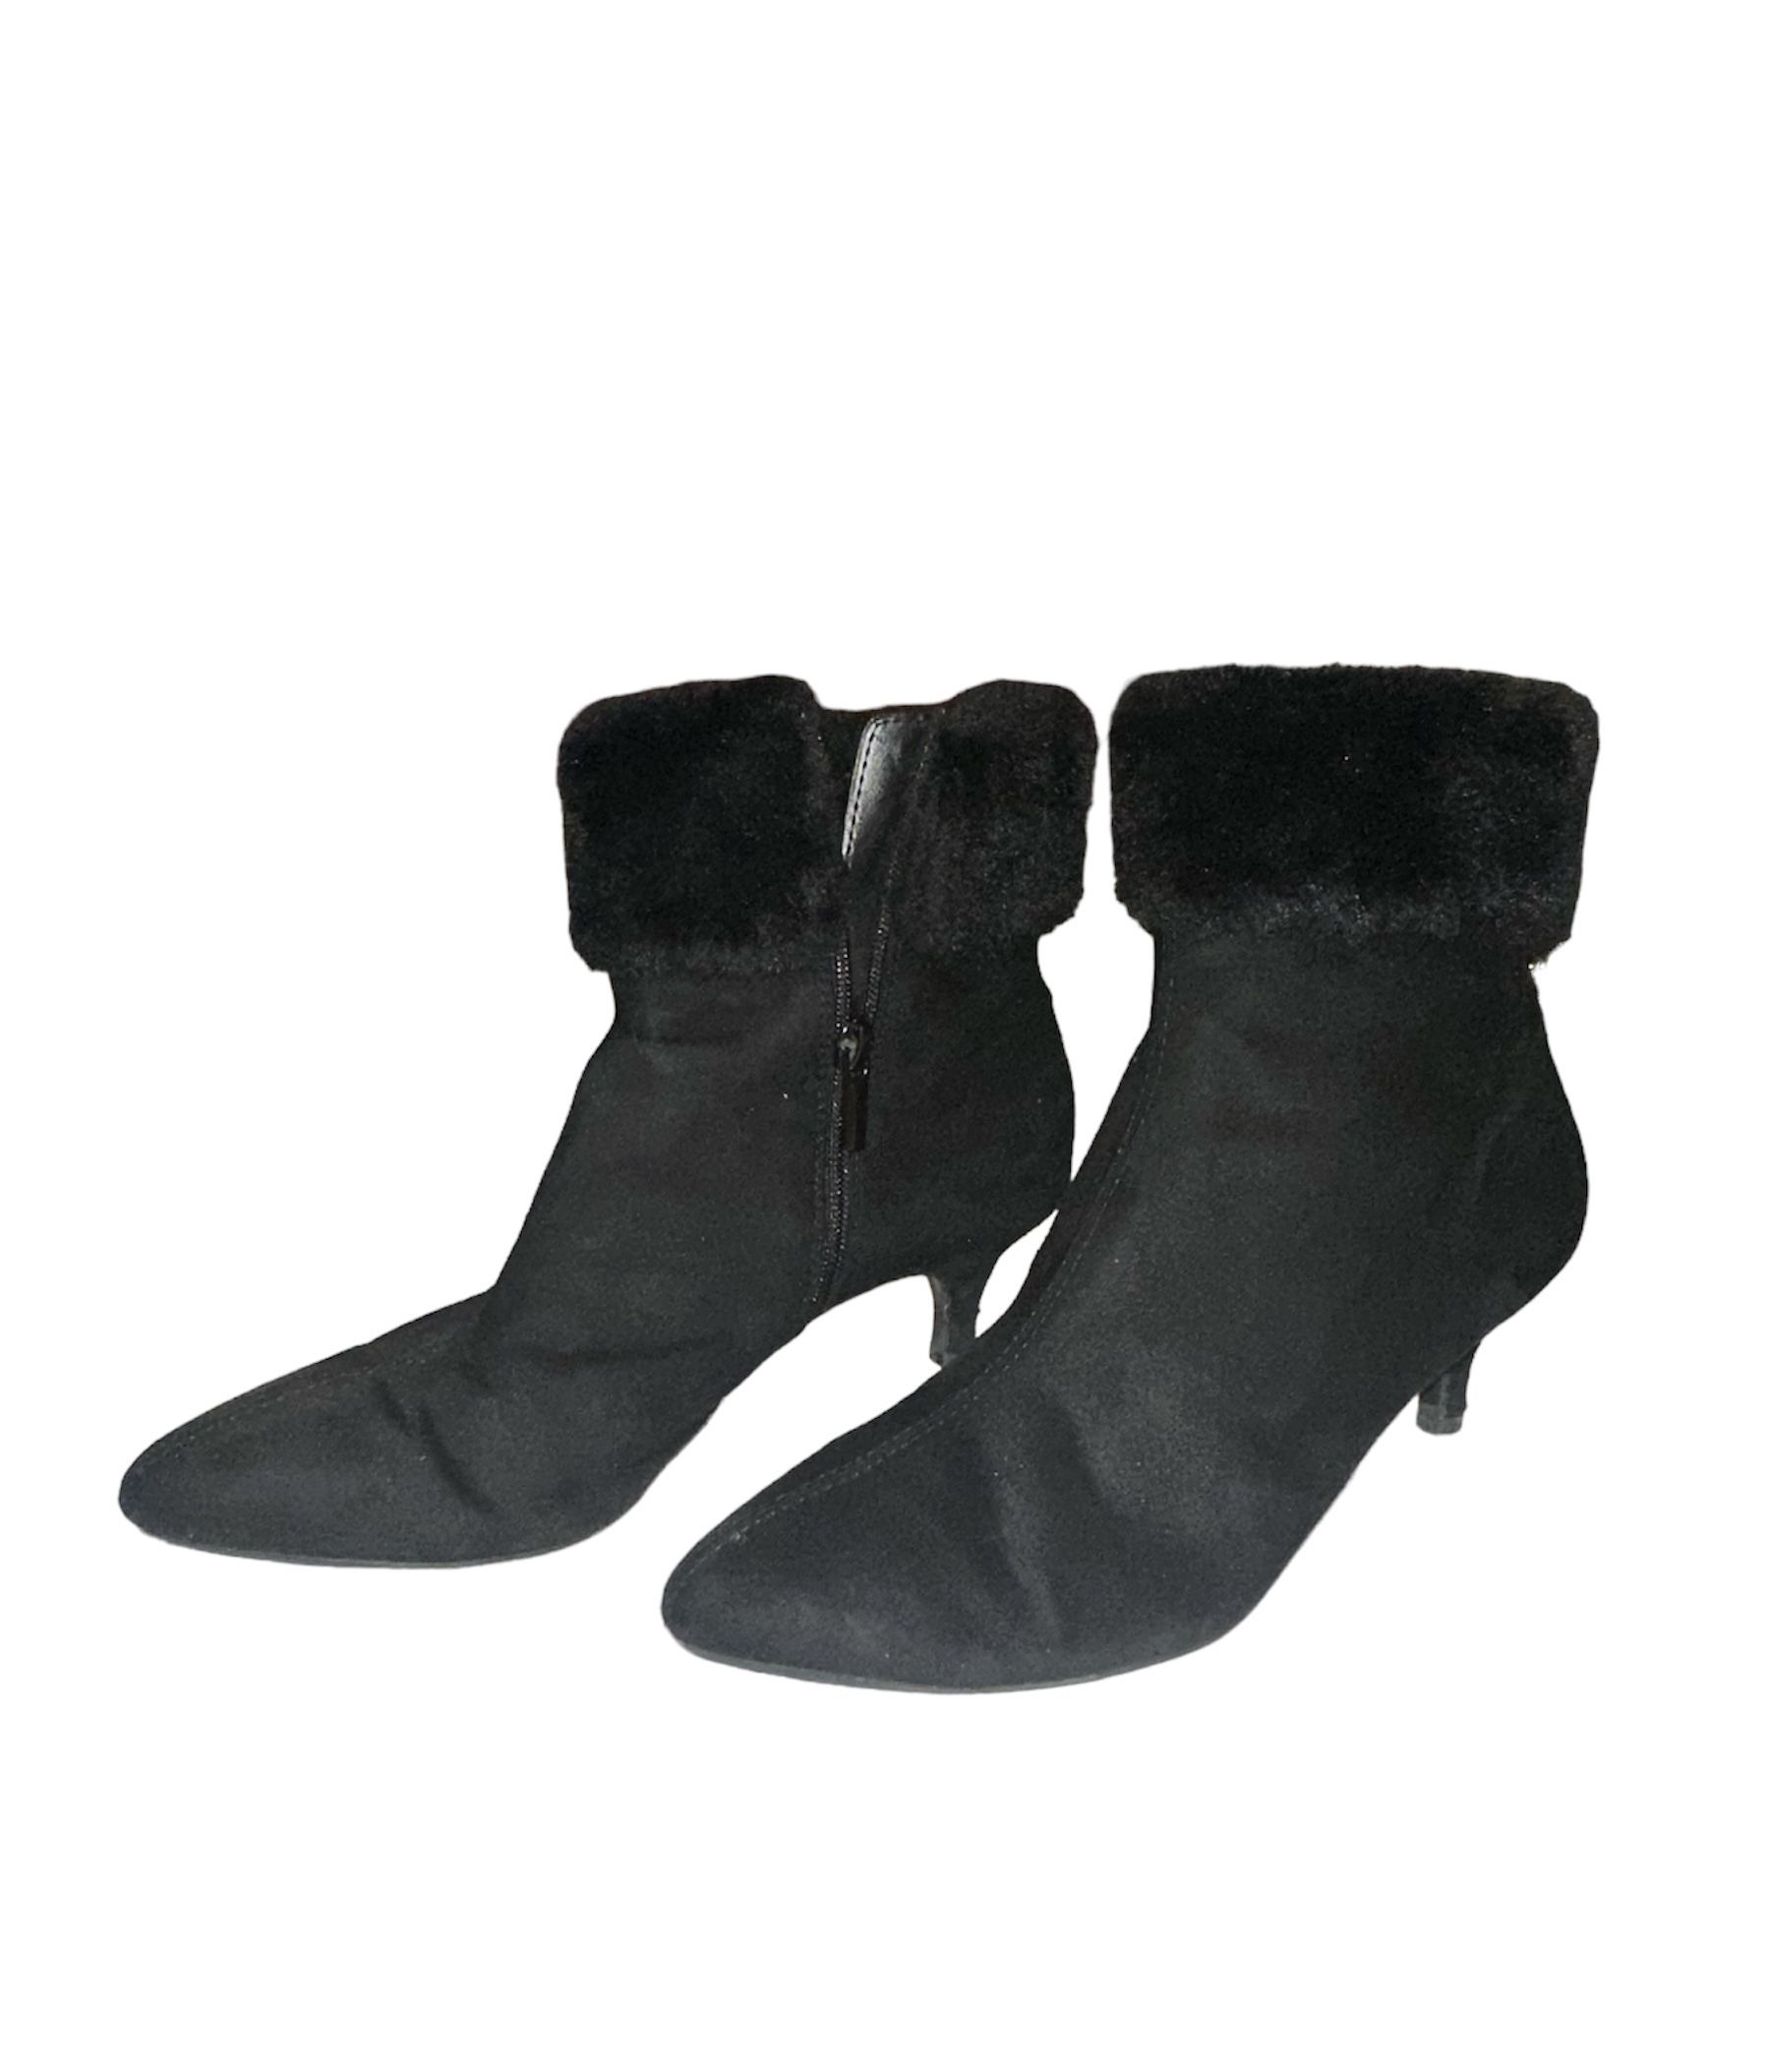 Impo Black Suede Neemie Inside Zip Boot Trimmed in Faux Fur (Size 7.5M)